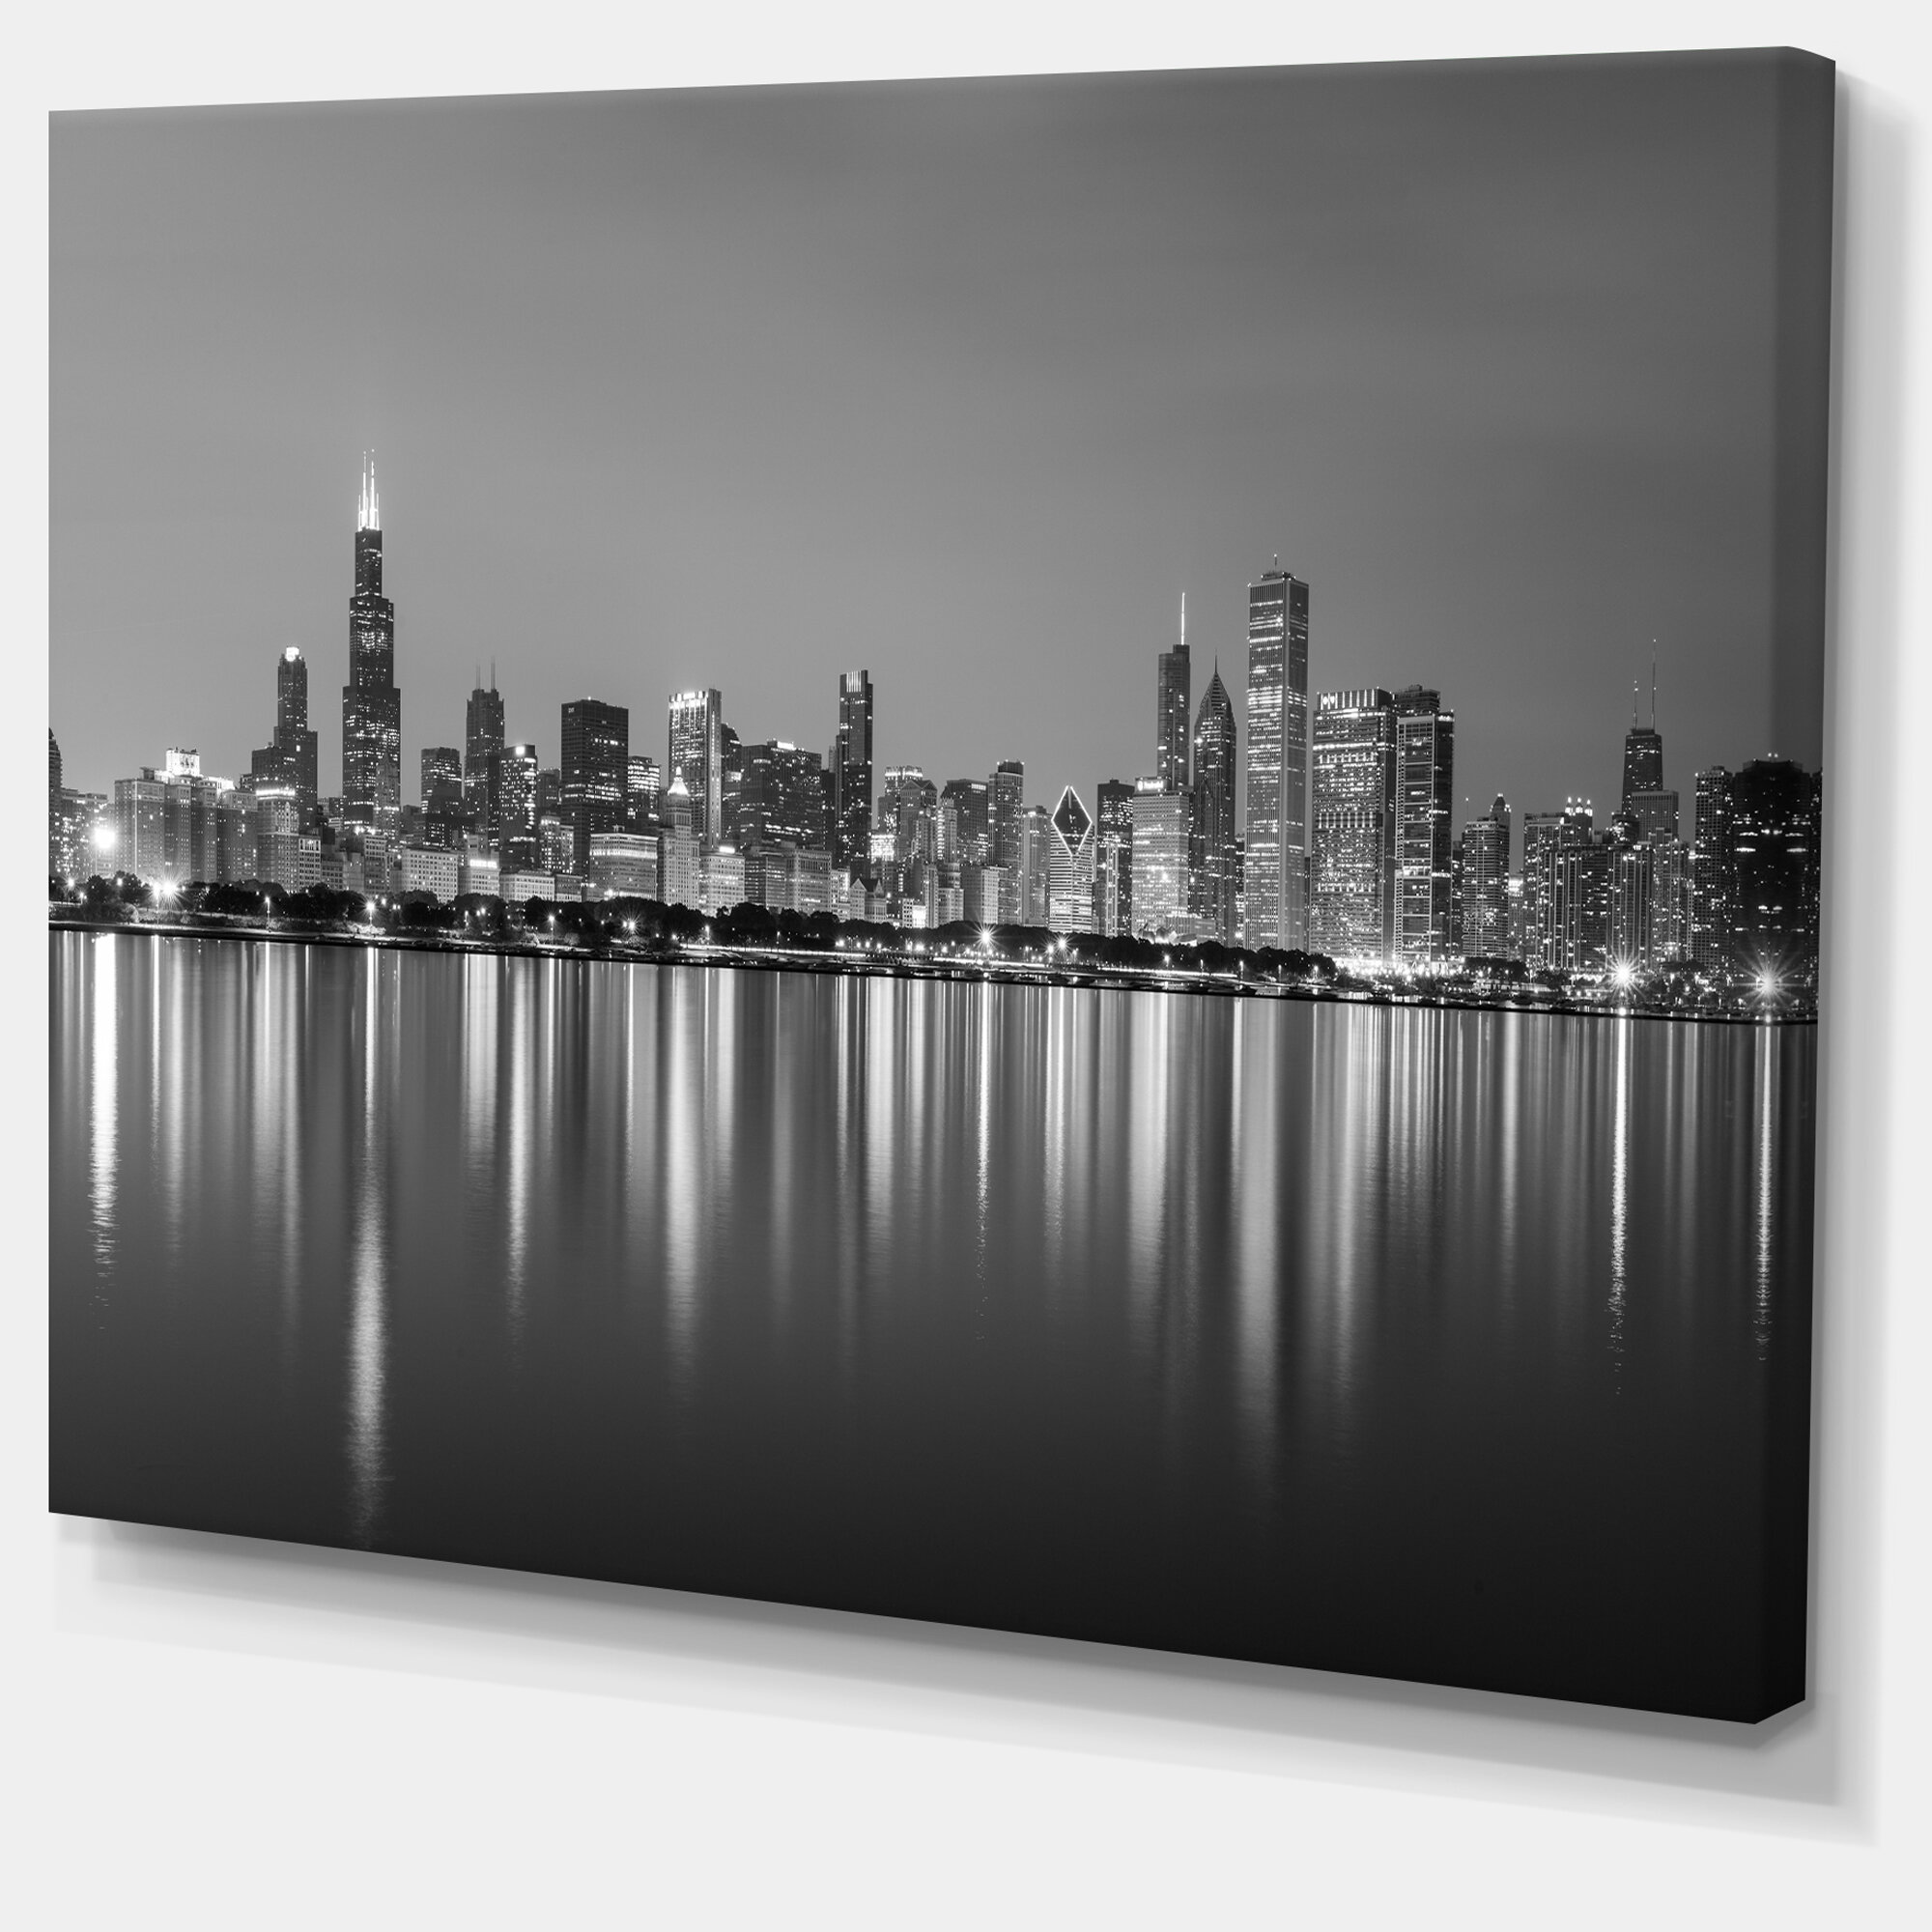 Cityscape Chicago Skyline At Night Black And White Photograph